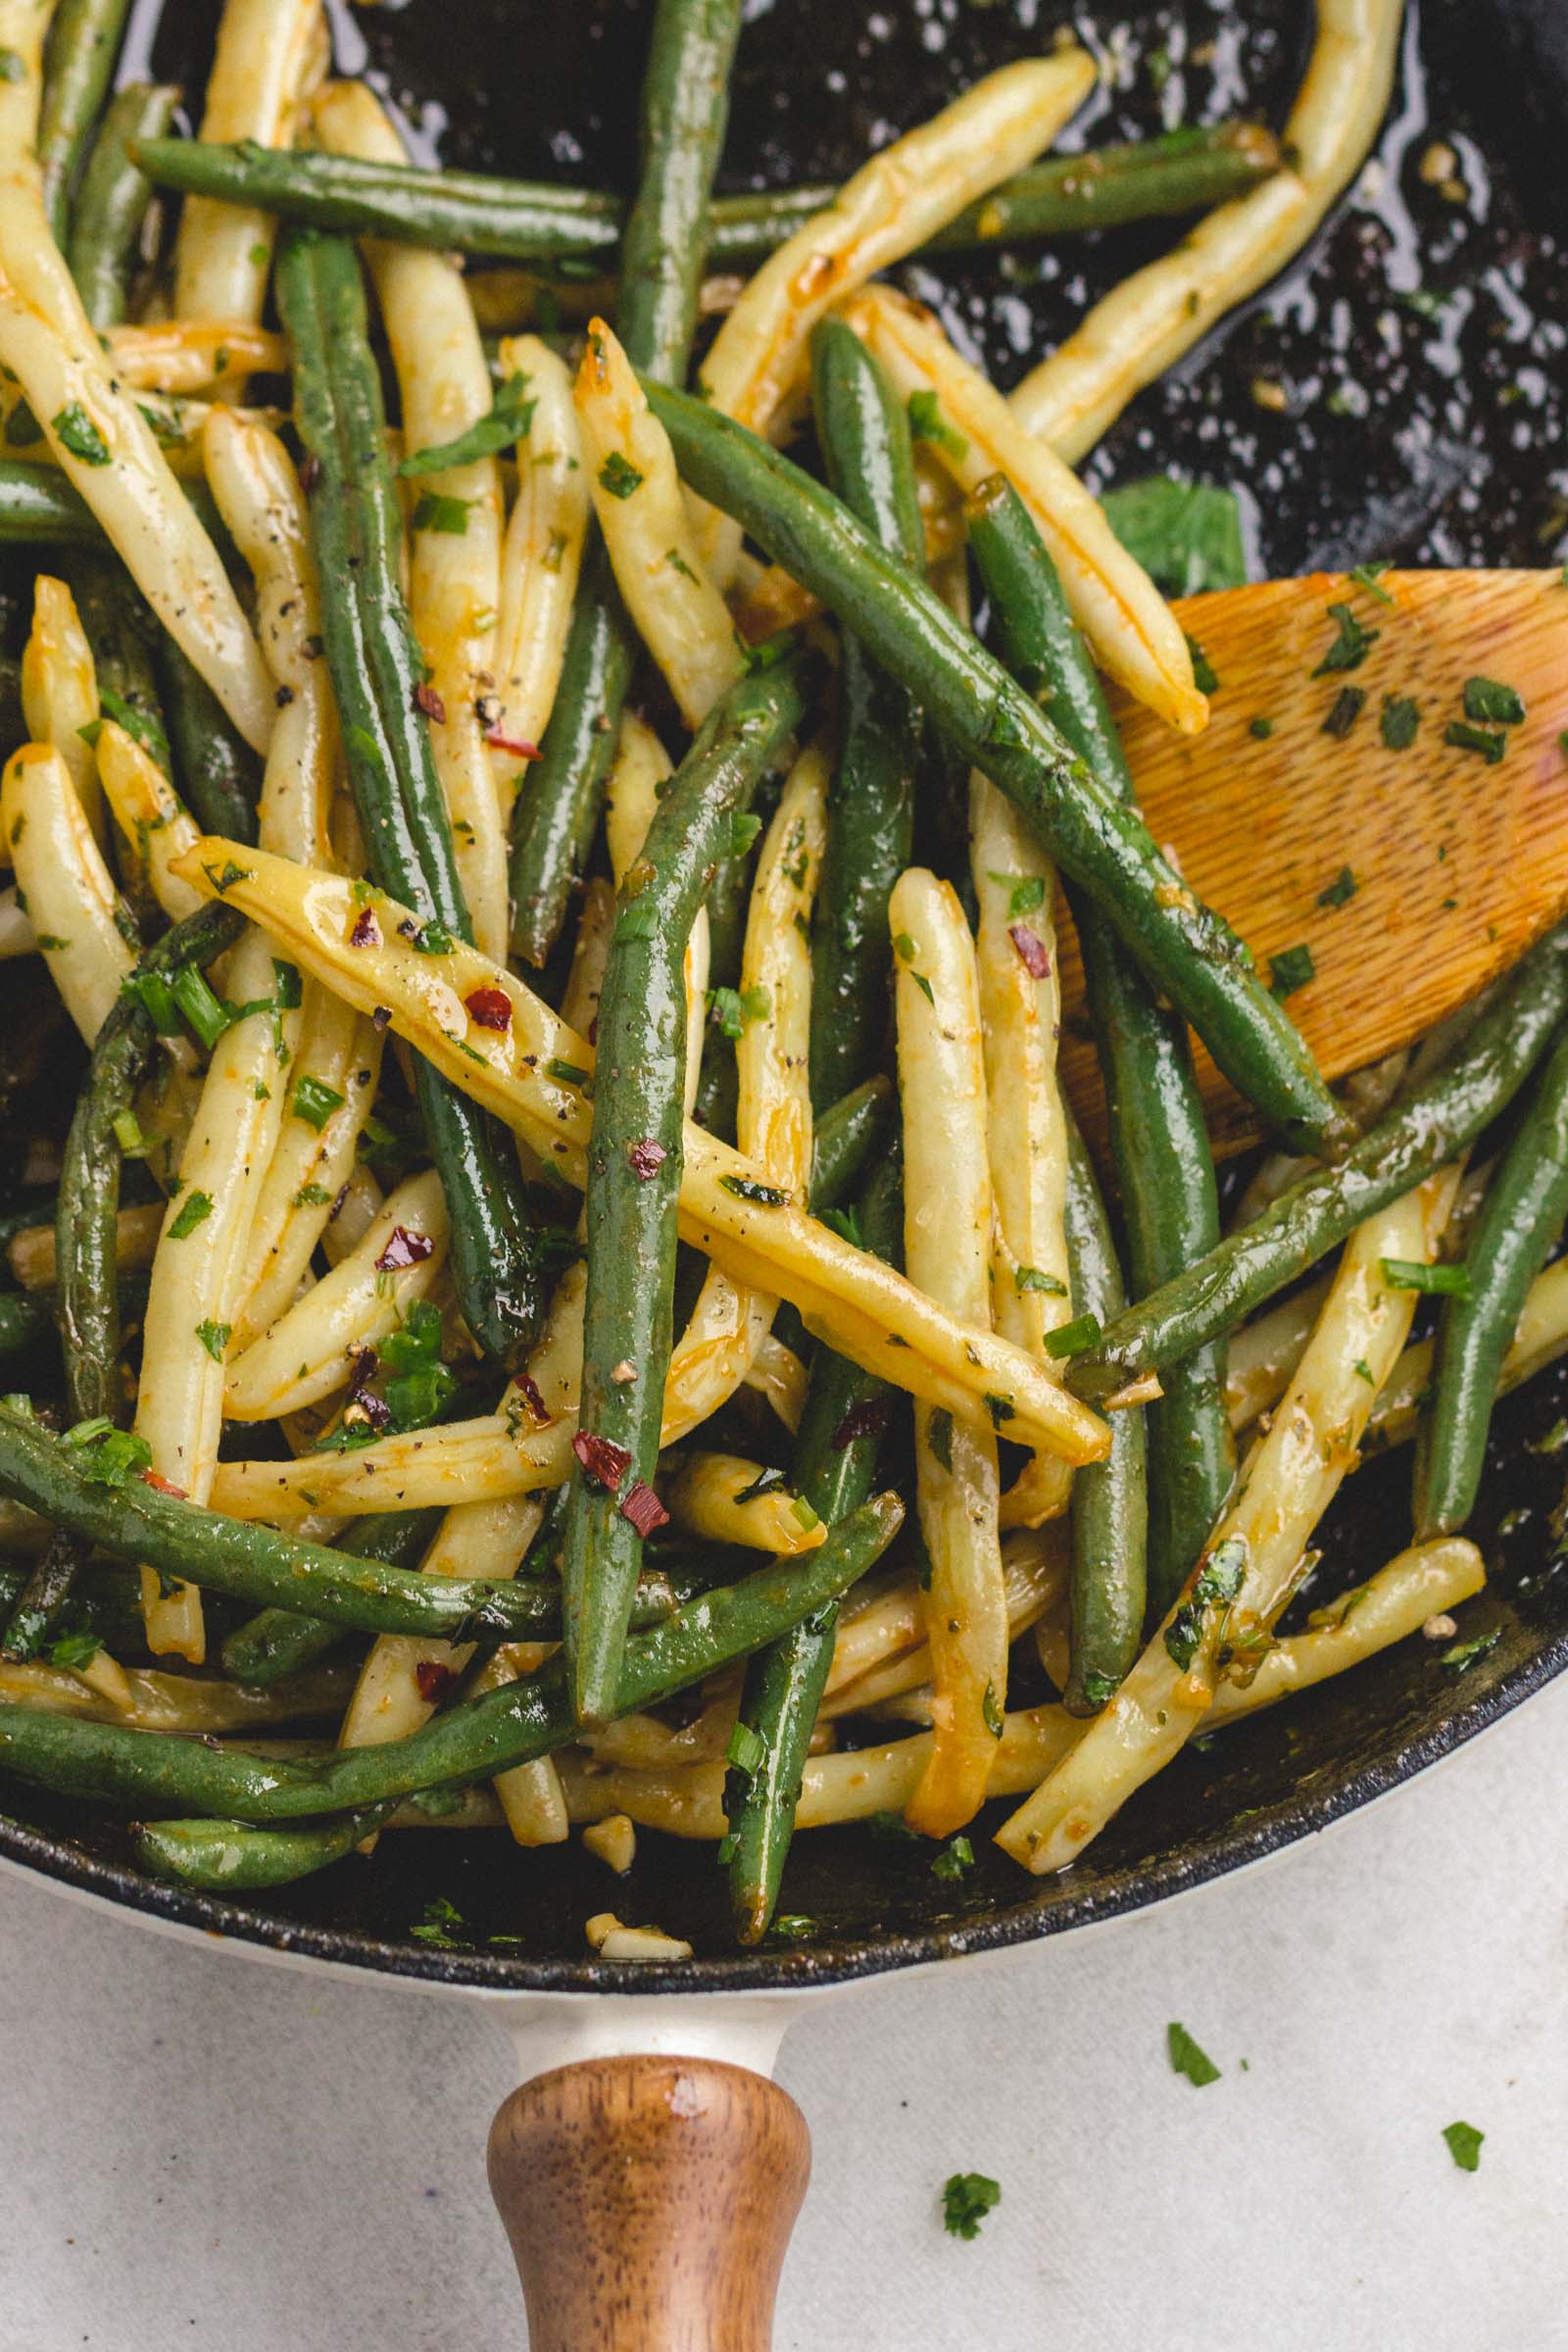 Lemon Garlic Butter Green Beans and Wax Beans Skillet - So little effort, so flavorful! This easy side dish hits all of the perfect notes.